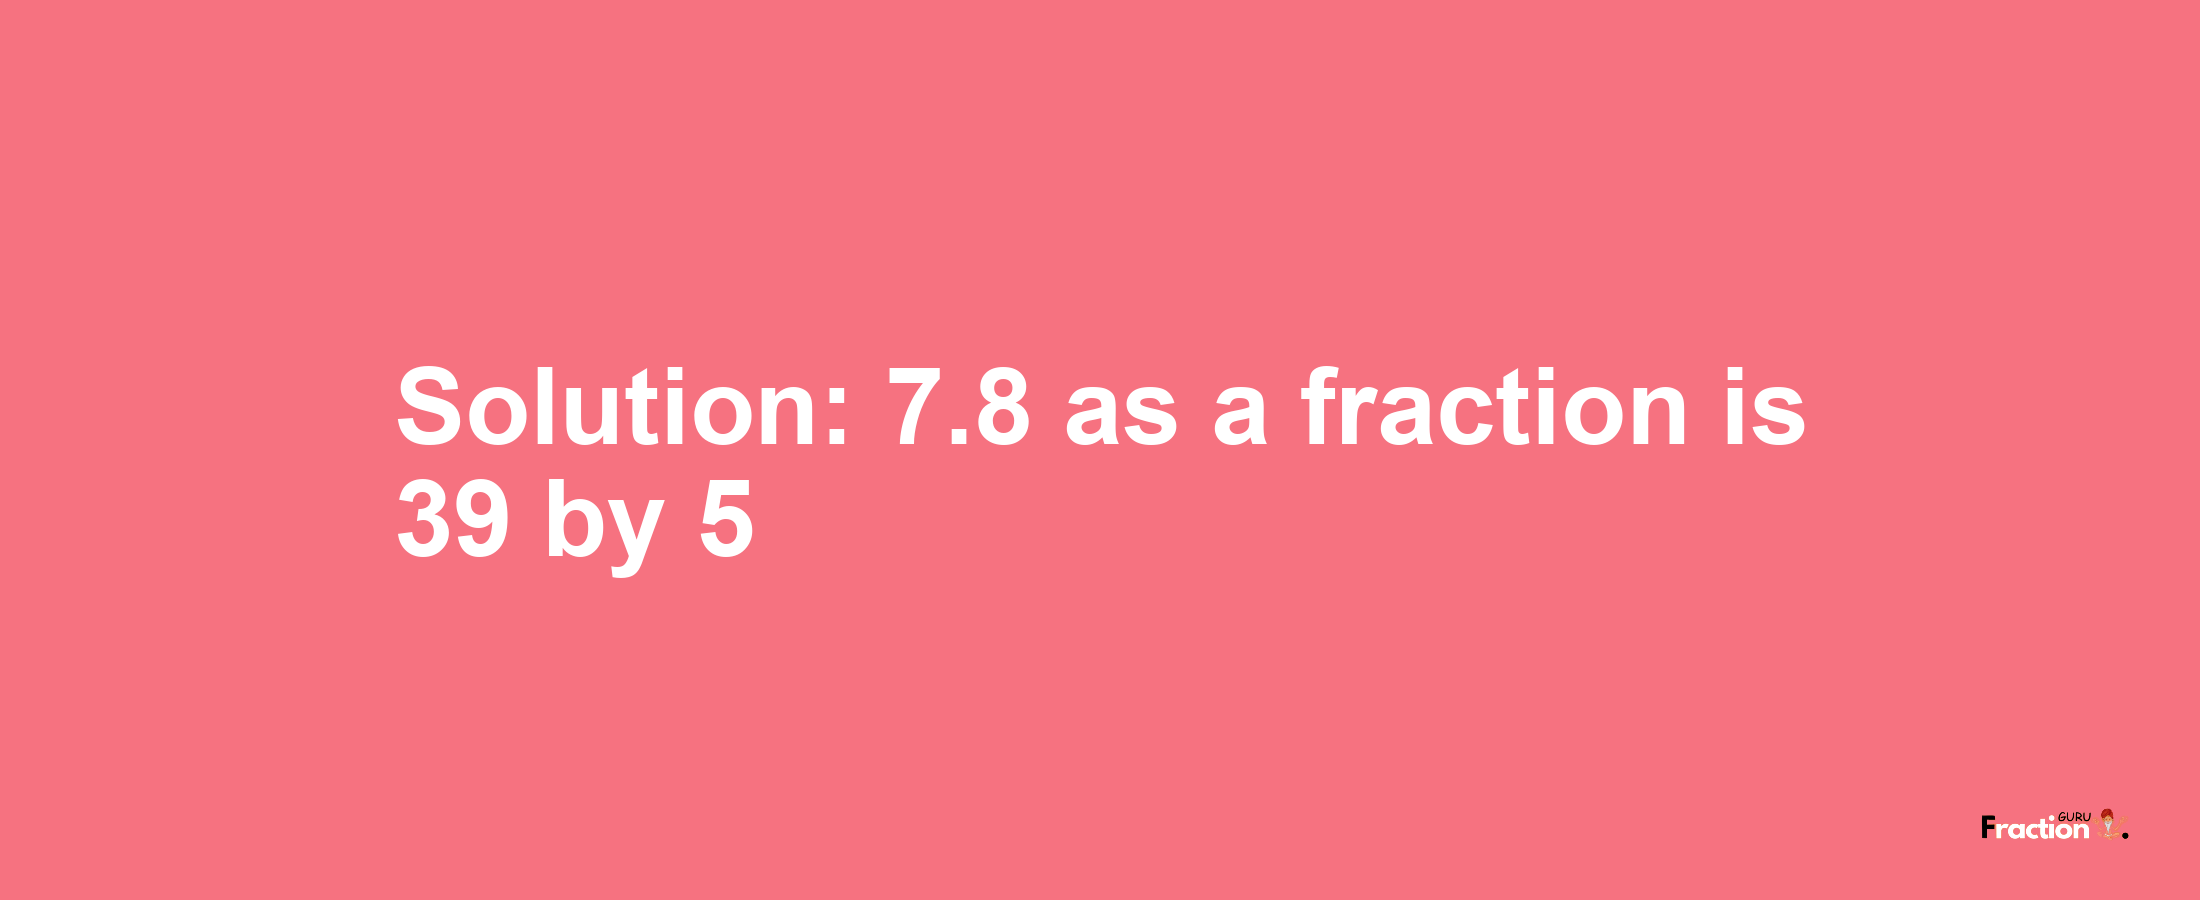 Solution:7.8 as a fraction is 39/5